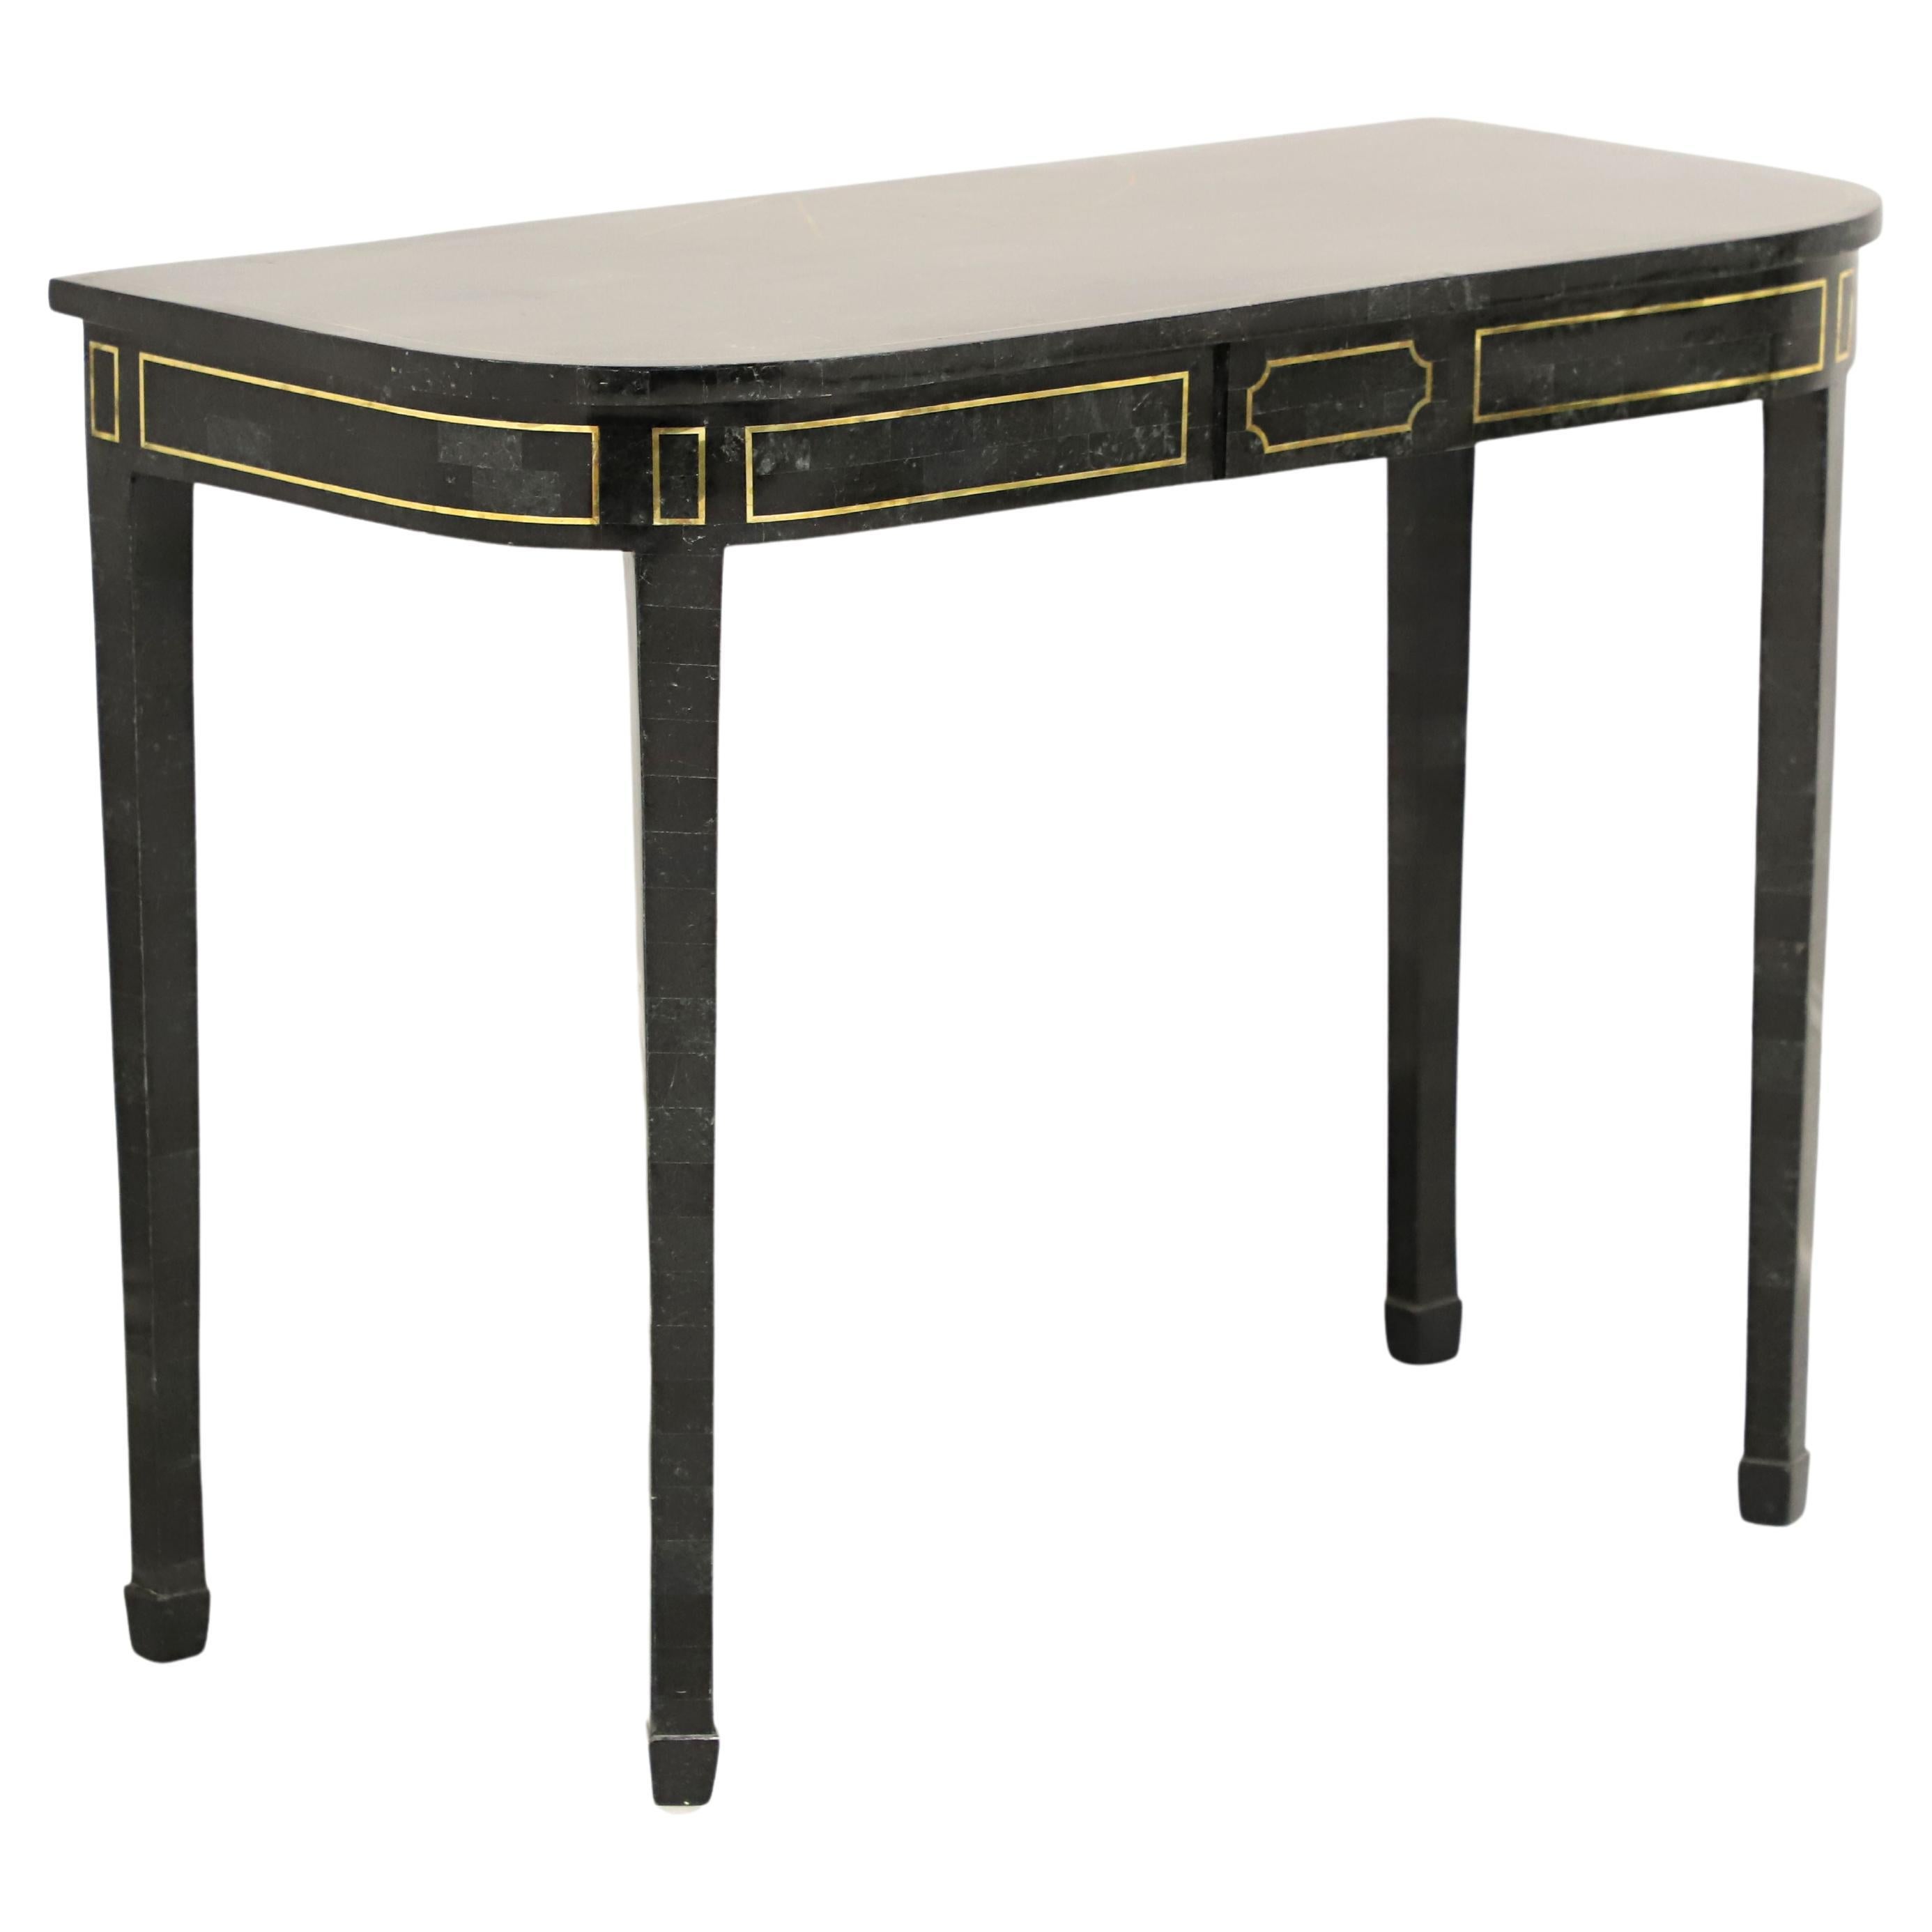 MAITLAND SMITH Tessellated Green Marble with Brass Inlay Console Table For Sale